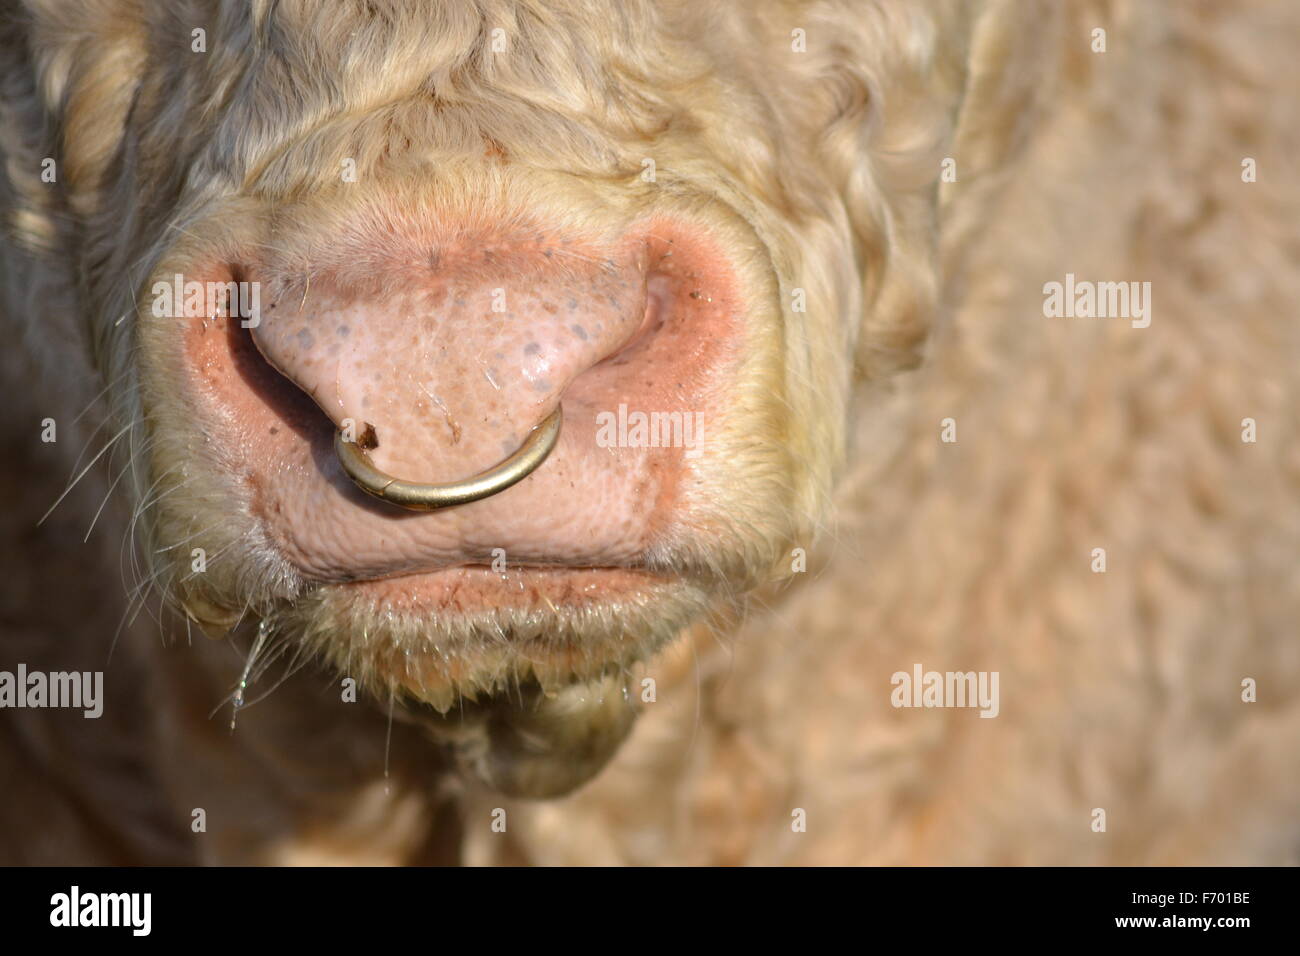 close up of a bull with ring in nose Stock Photo